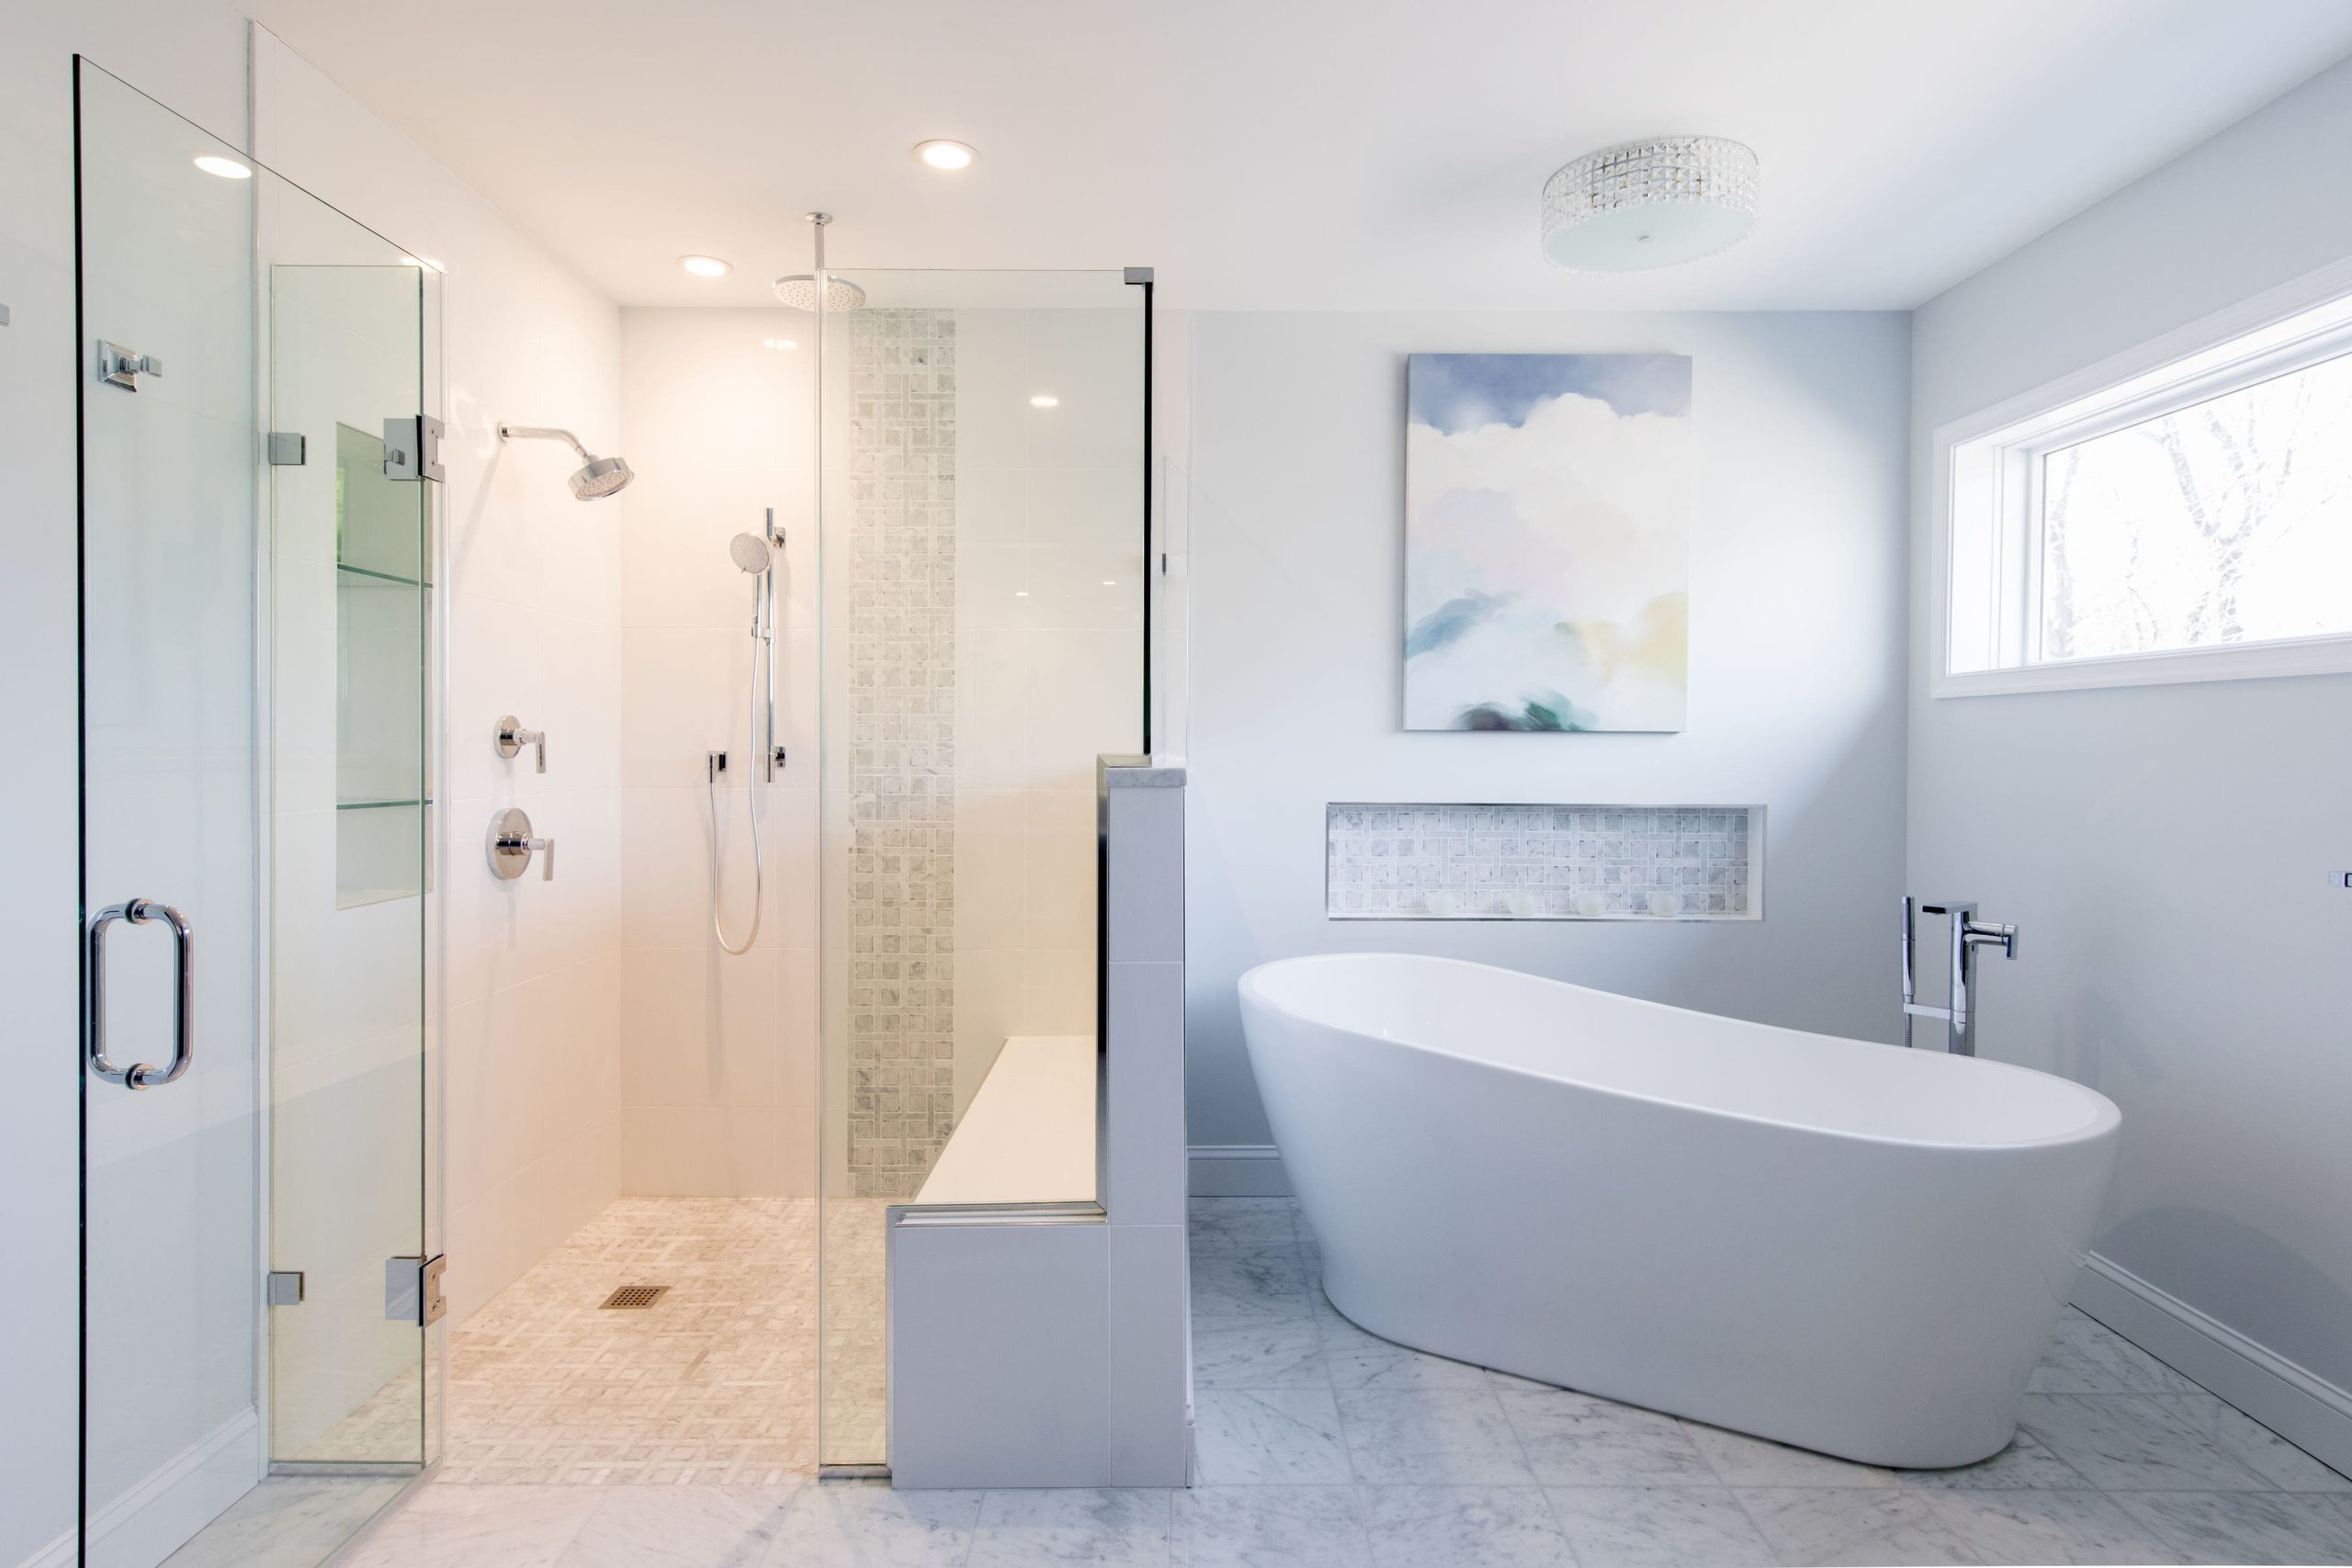 a modern bathroom with bright bathtub and glass shower with bench